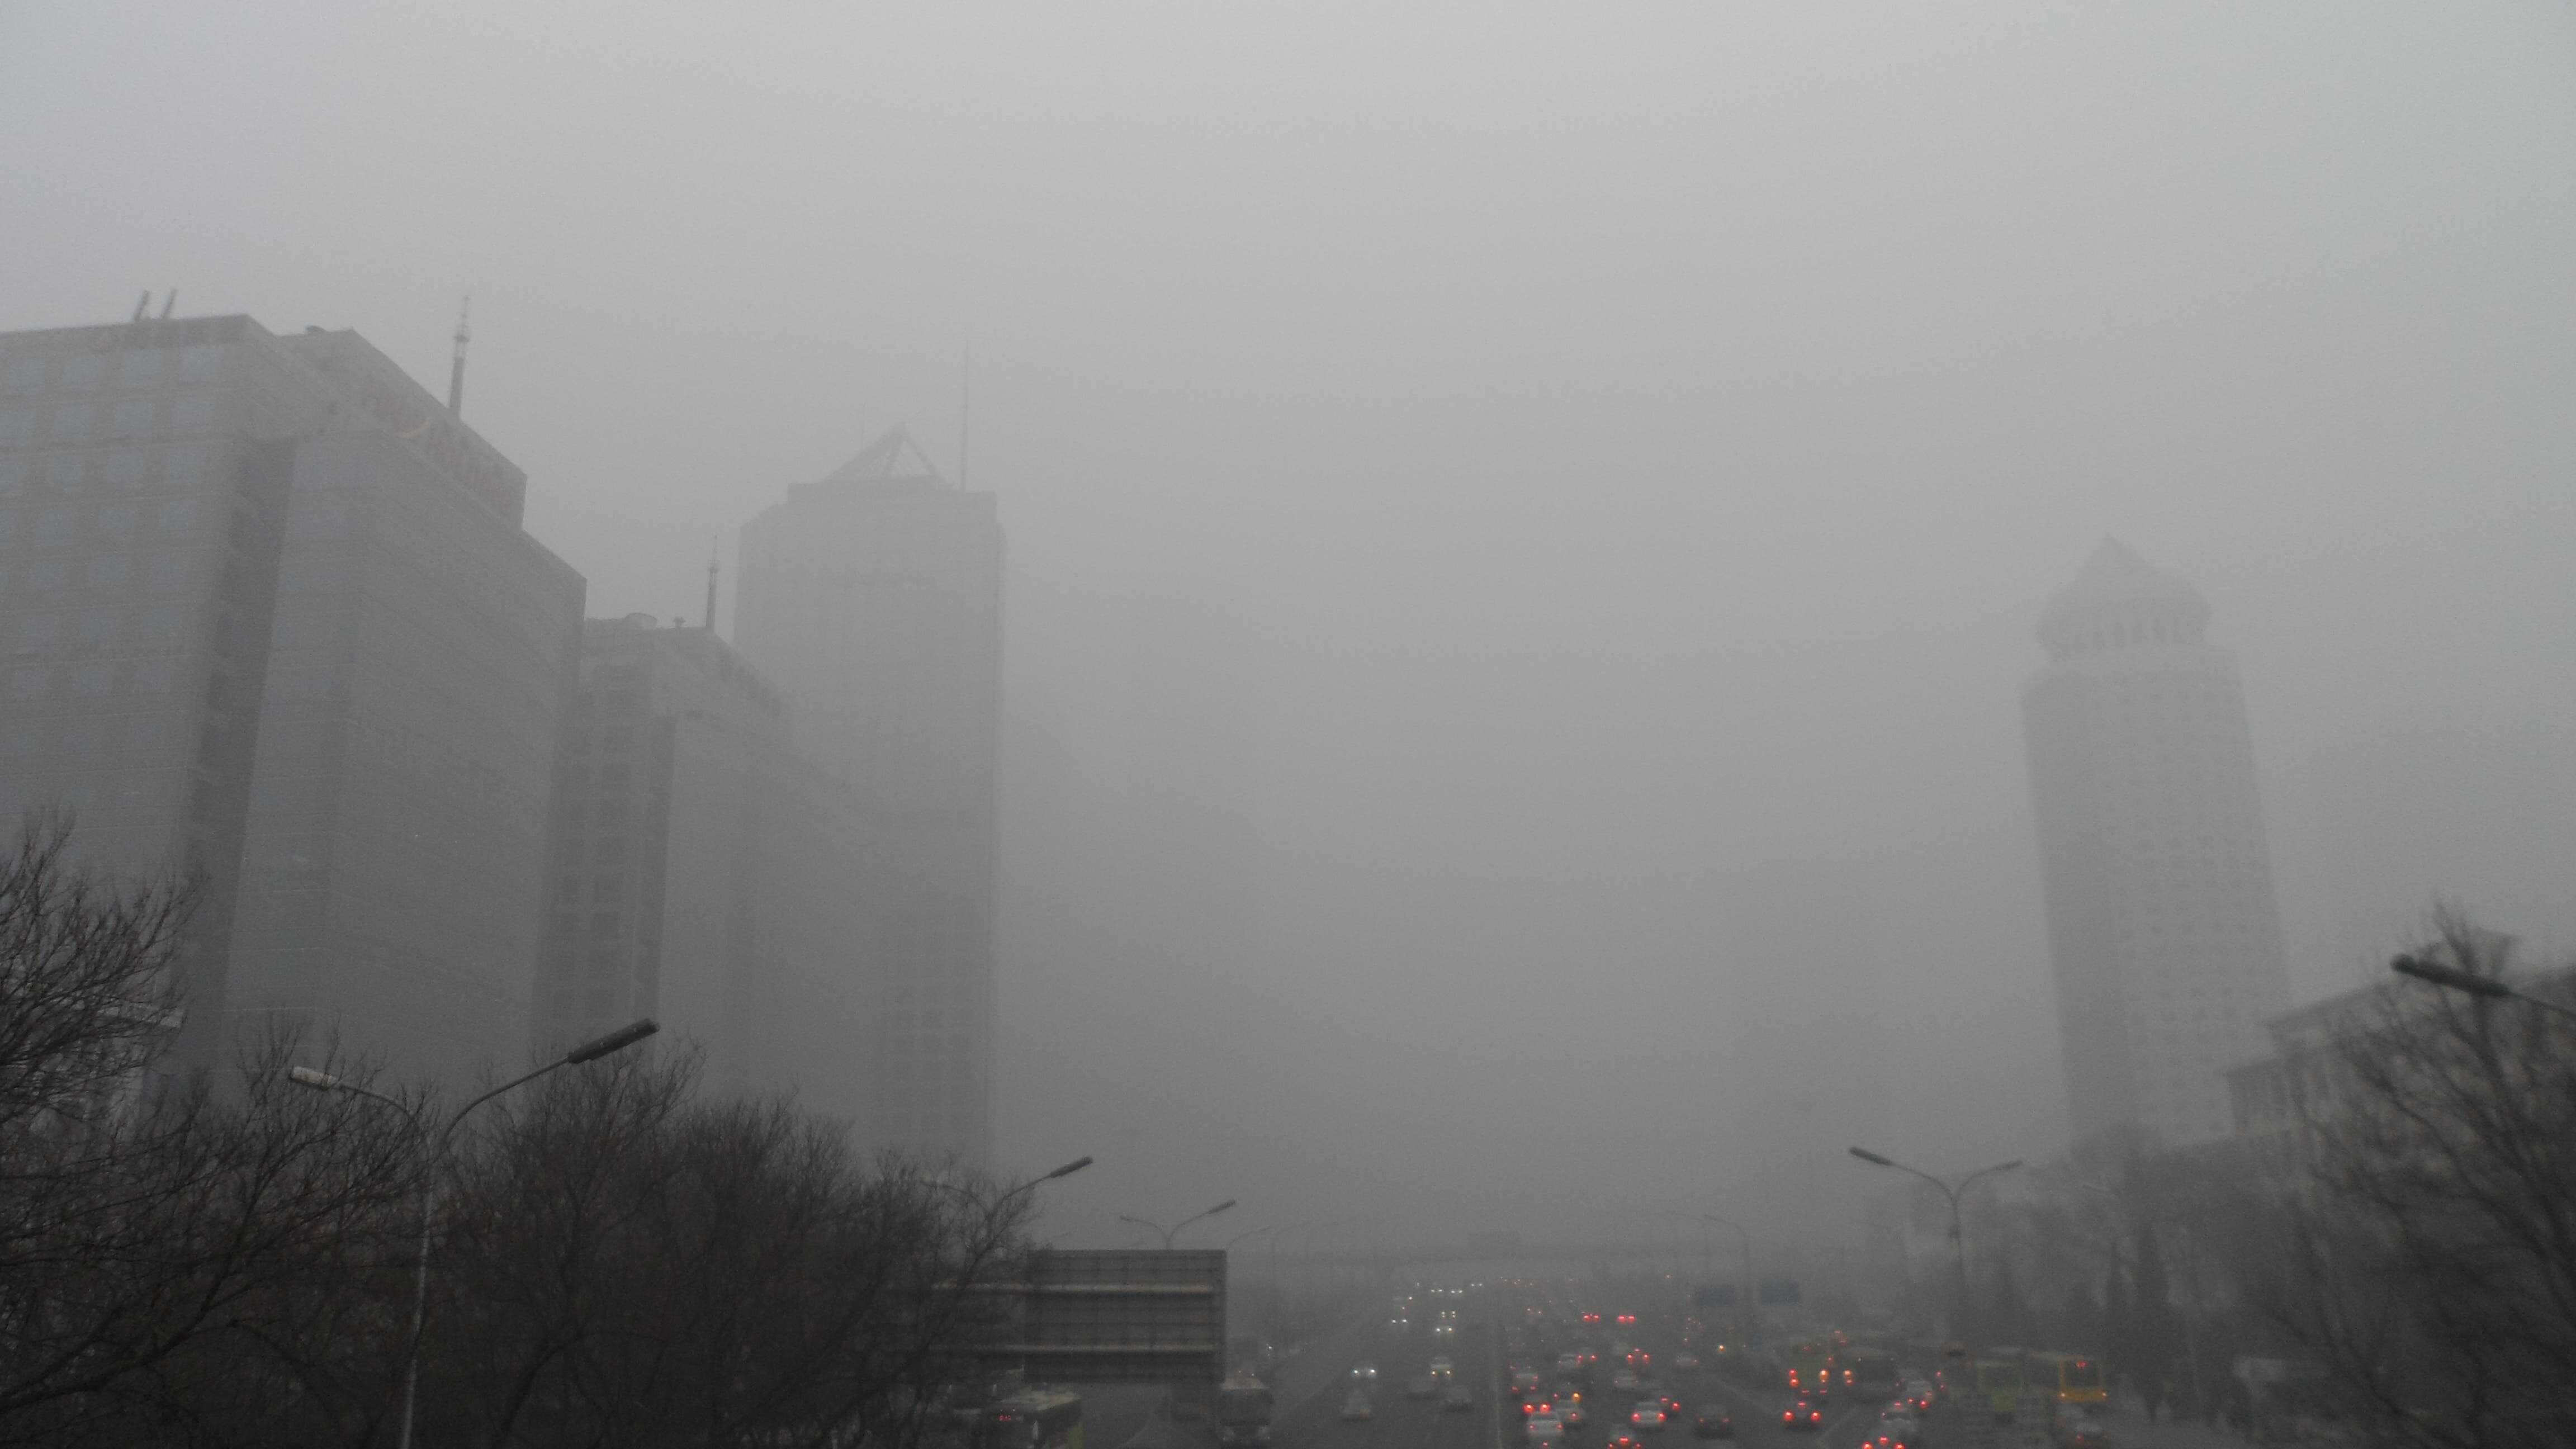 Beijing has been struggling with smog for a long time, but eliminating the city's coal stations is expected to make a big difference. Image credits: 螺钉.